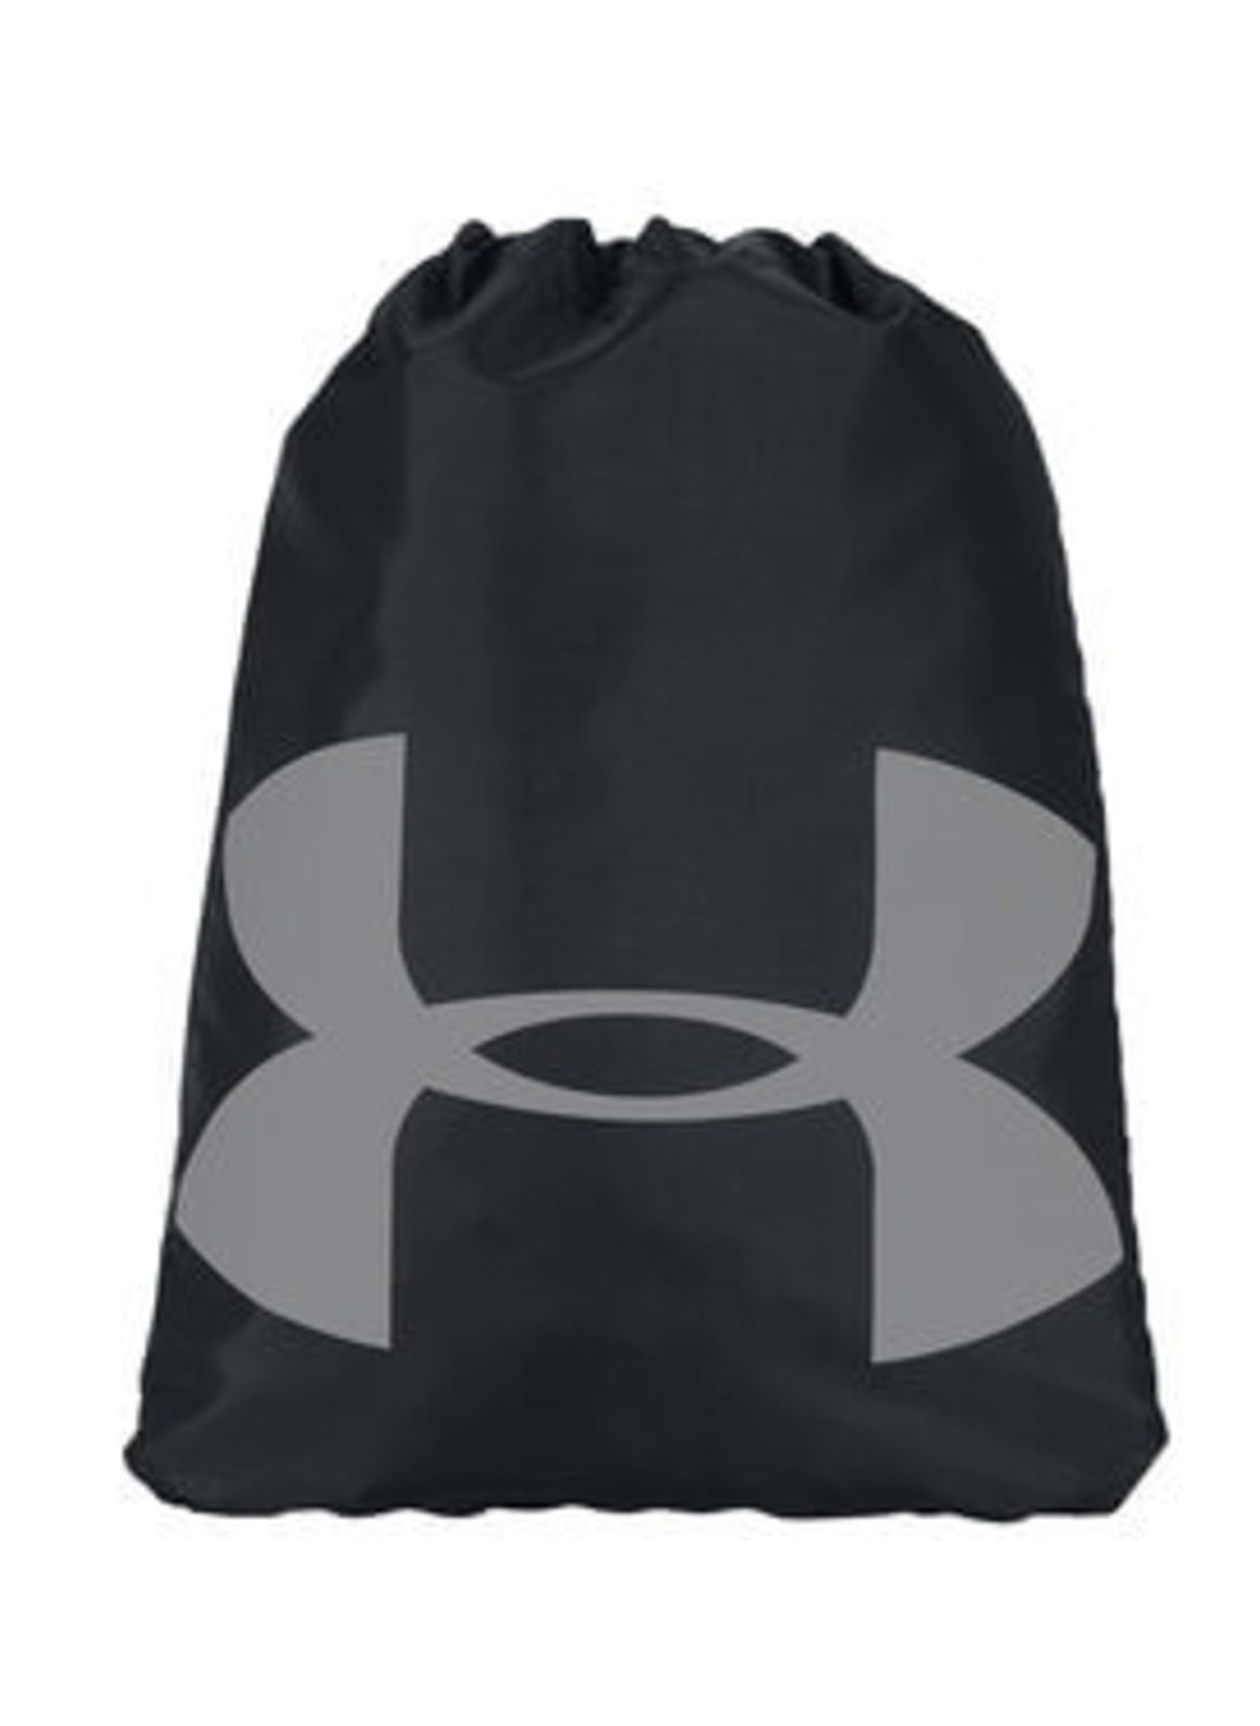 Under Armour Black Ozsee Sackpack